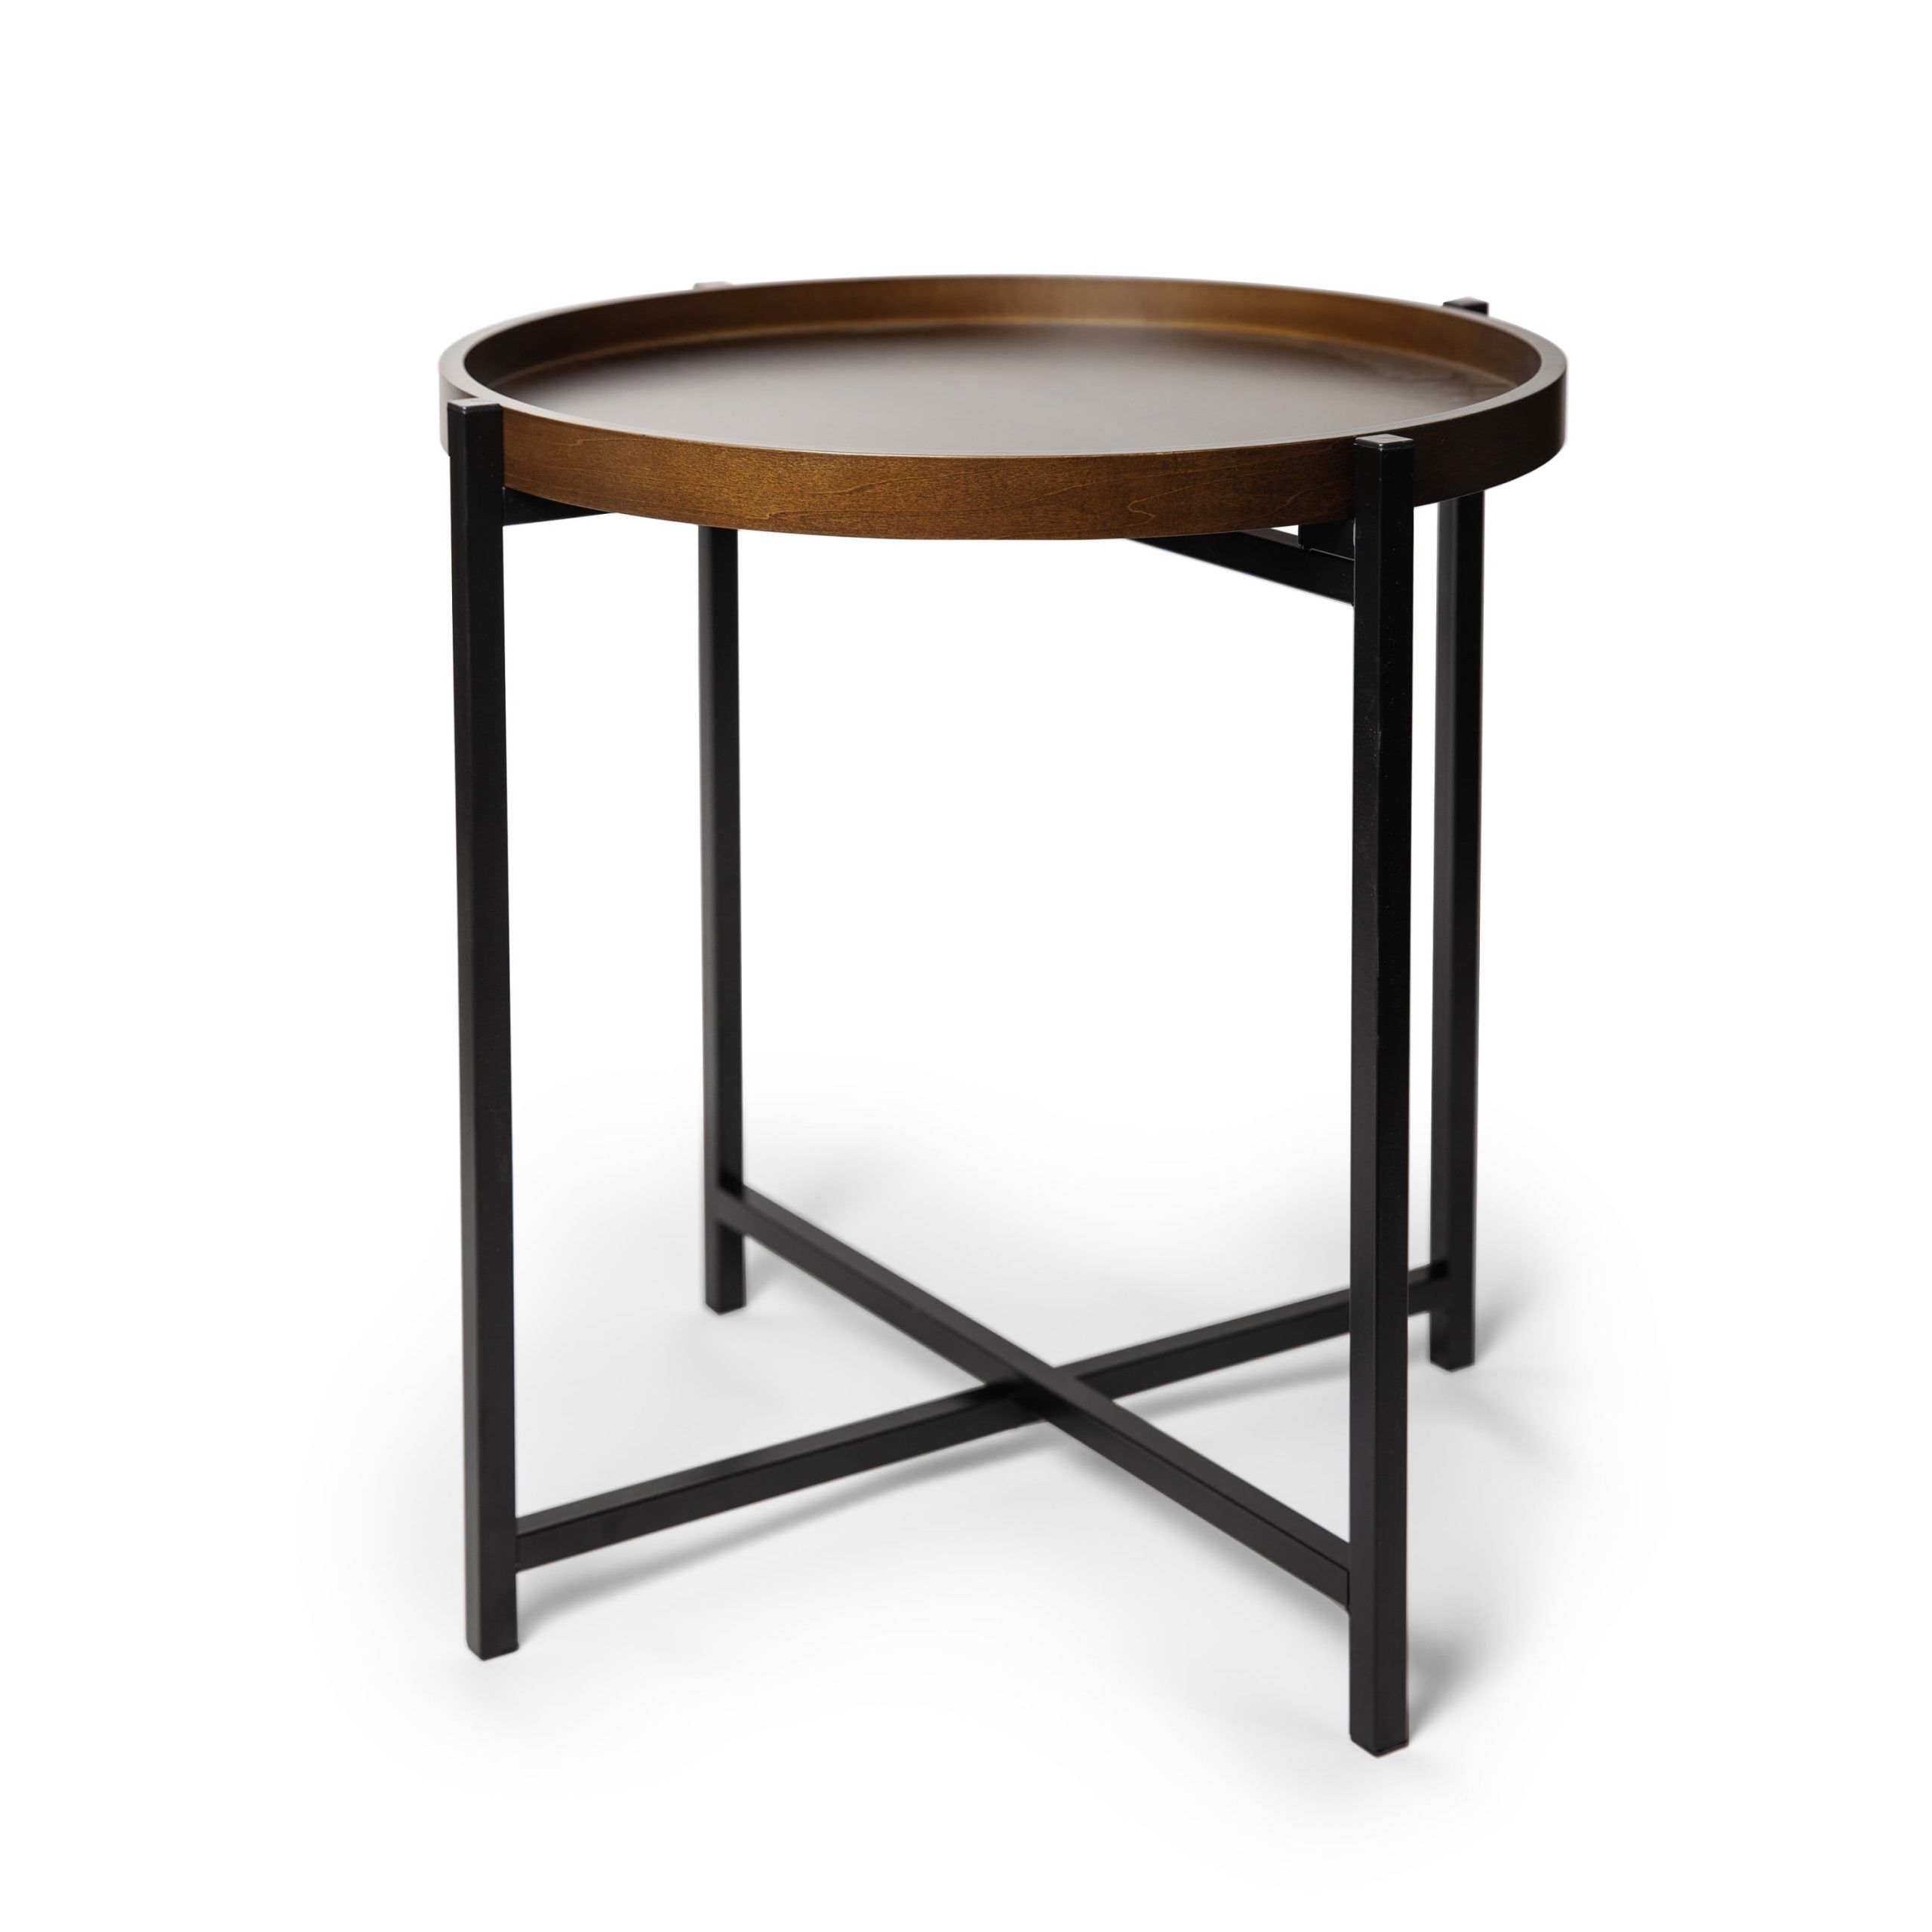 Mid Century Modern Round Side Table With Removable Wood Tray – Walmart Pertaining To Detachable Tray Coffee Tables (View 12 of 20)